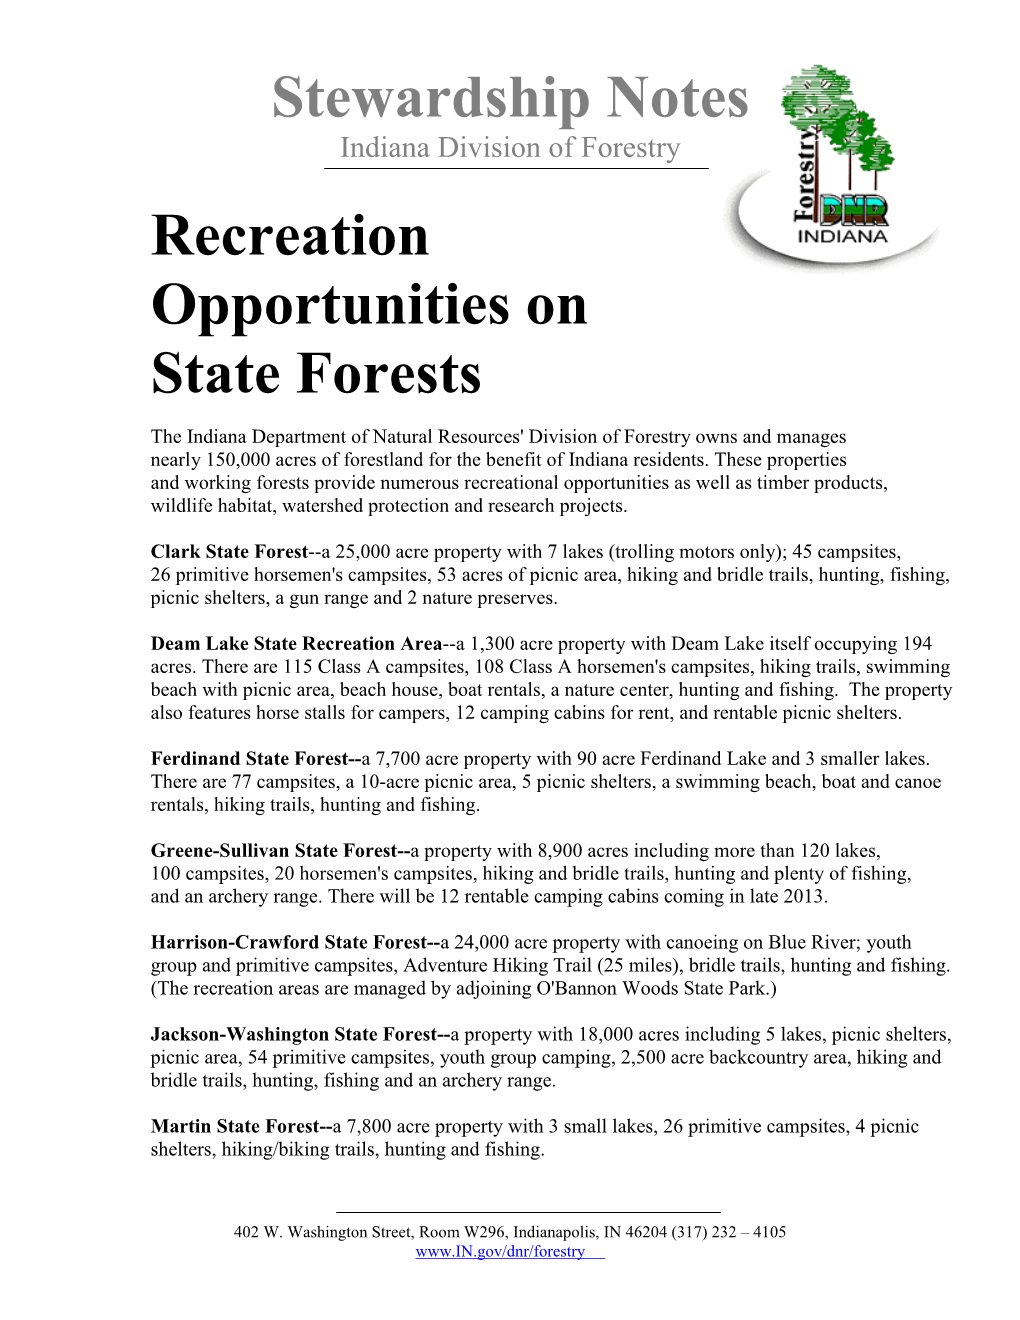 Recreational Opportunities on State Forest Properties